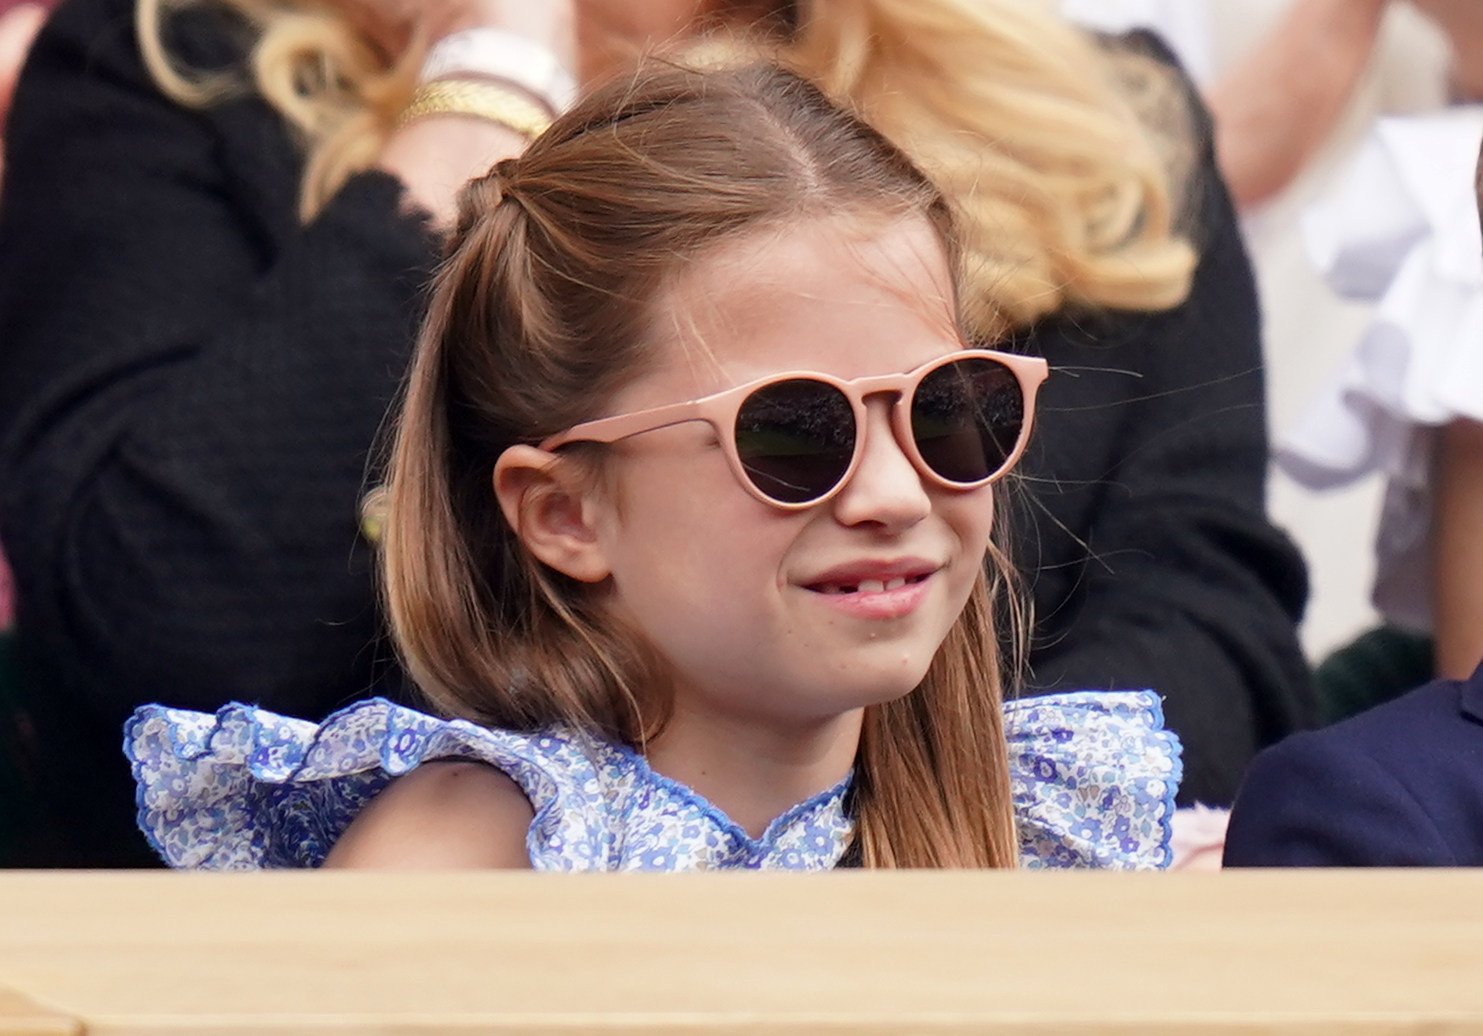 Britain’s Princess Charlotte turned heads in her cute outfit for her Wimbledon debut. Photo: PA Wire/DPA